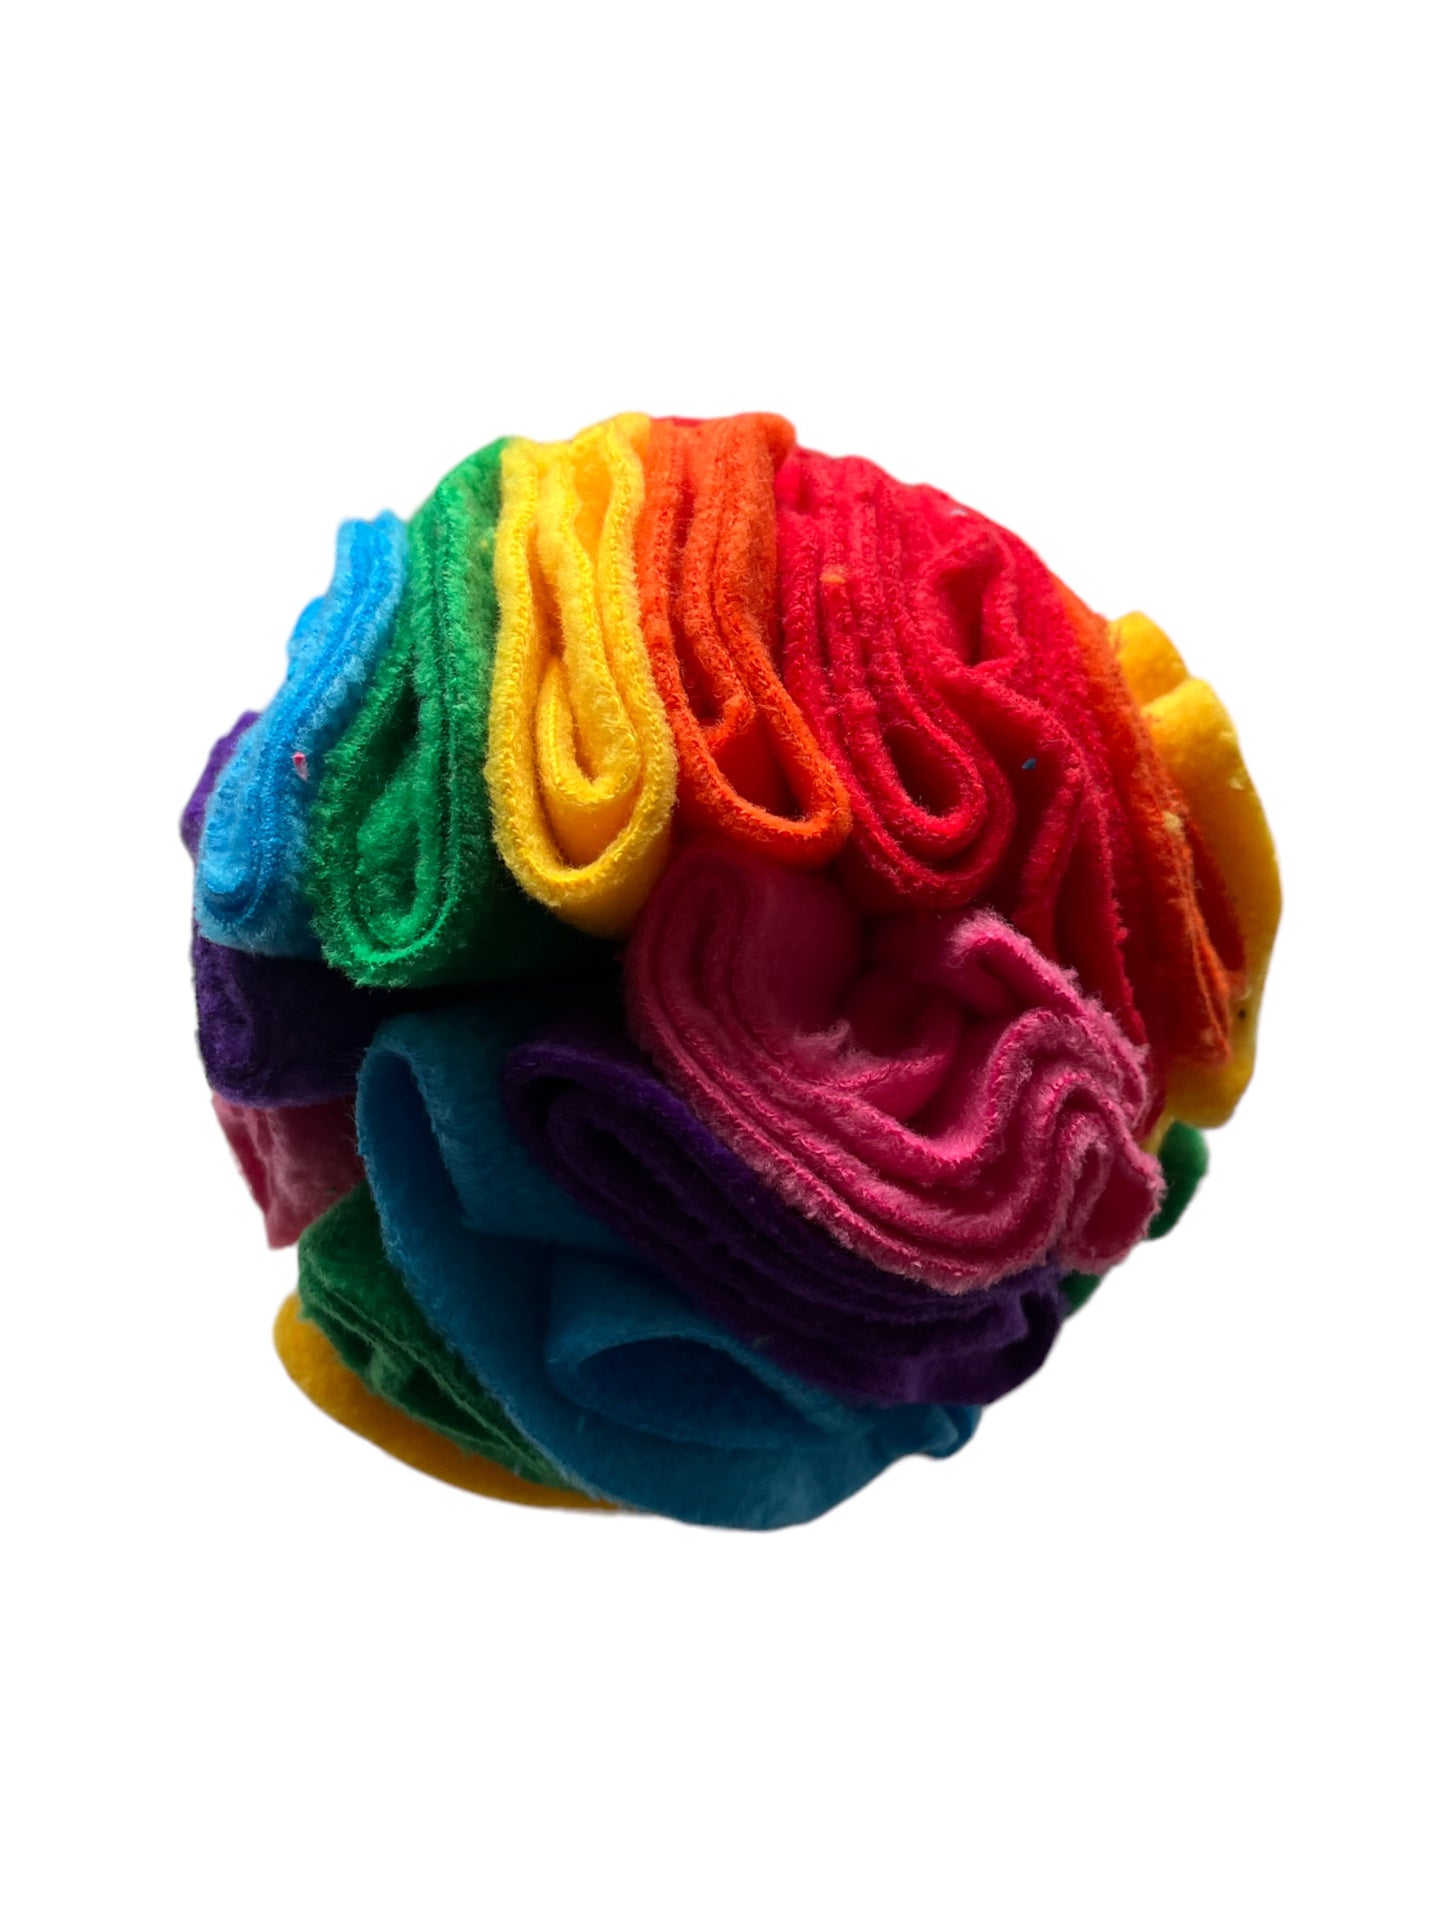 Snuffle ball sniff the rainbow, 6 inch size